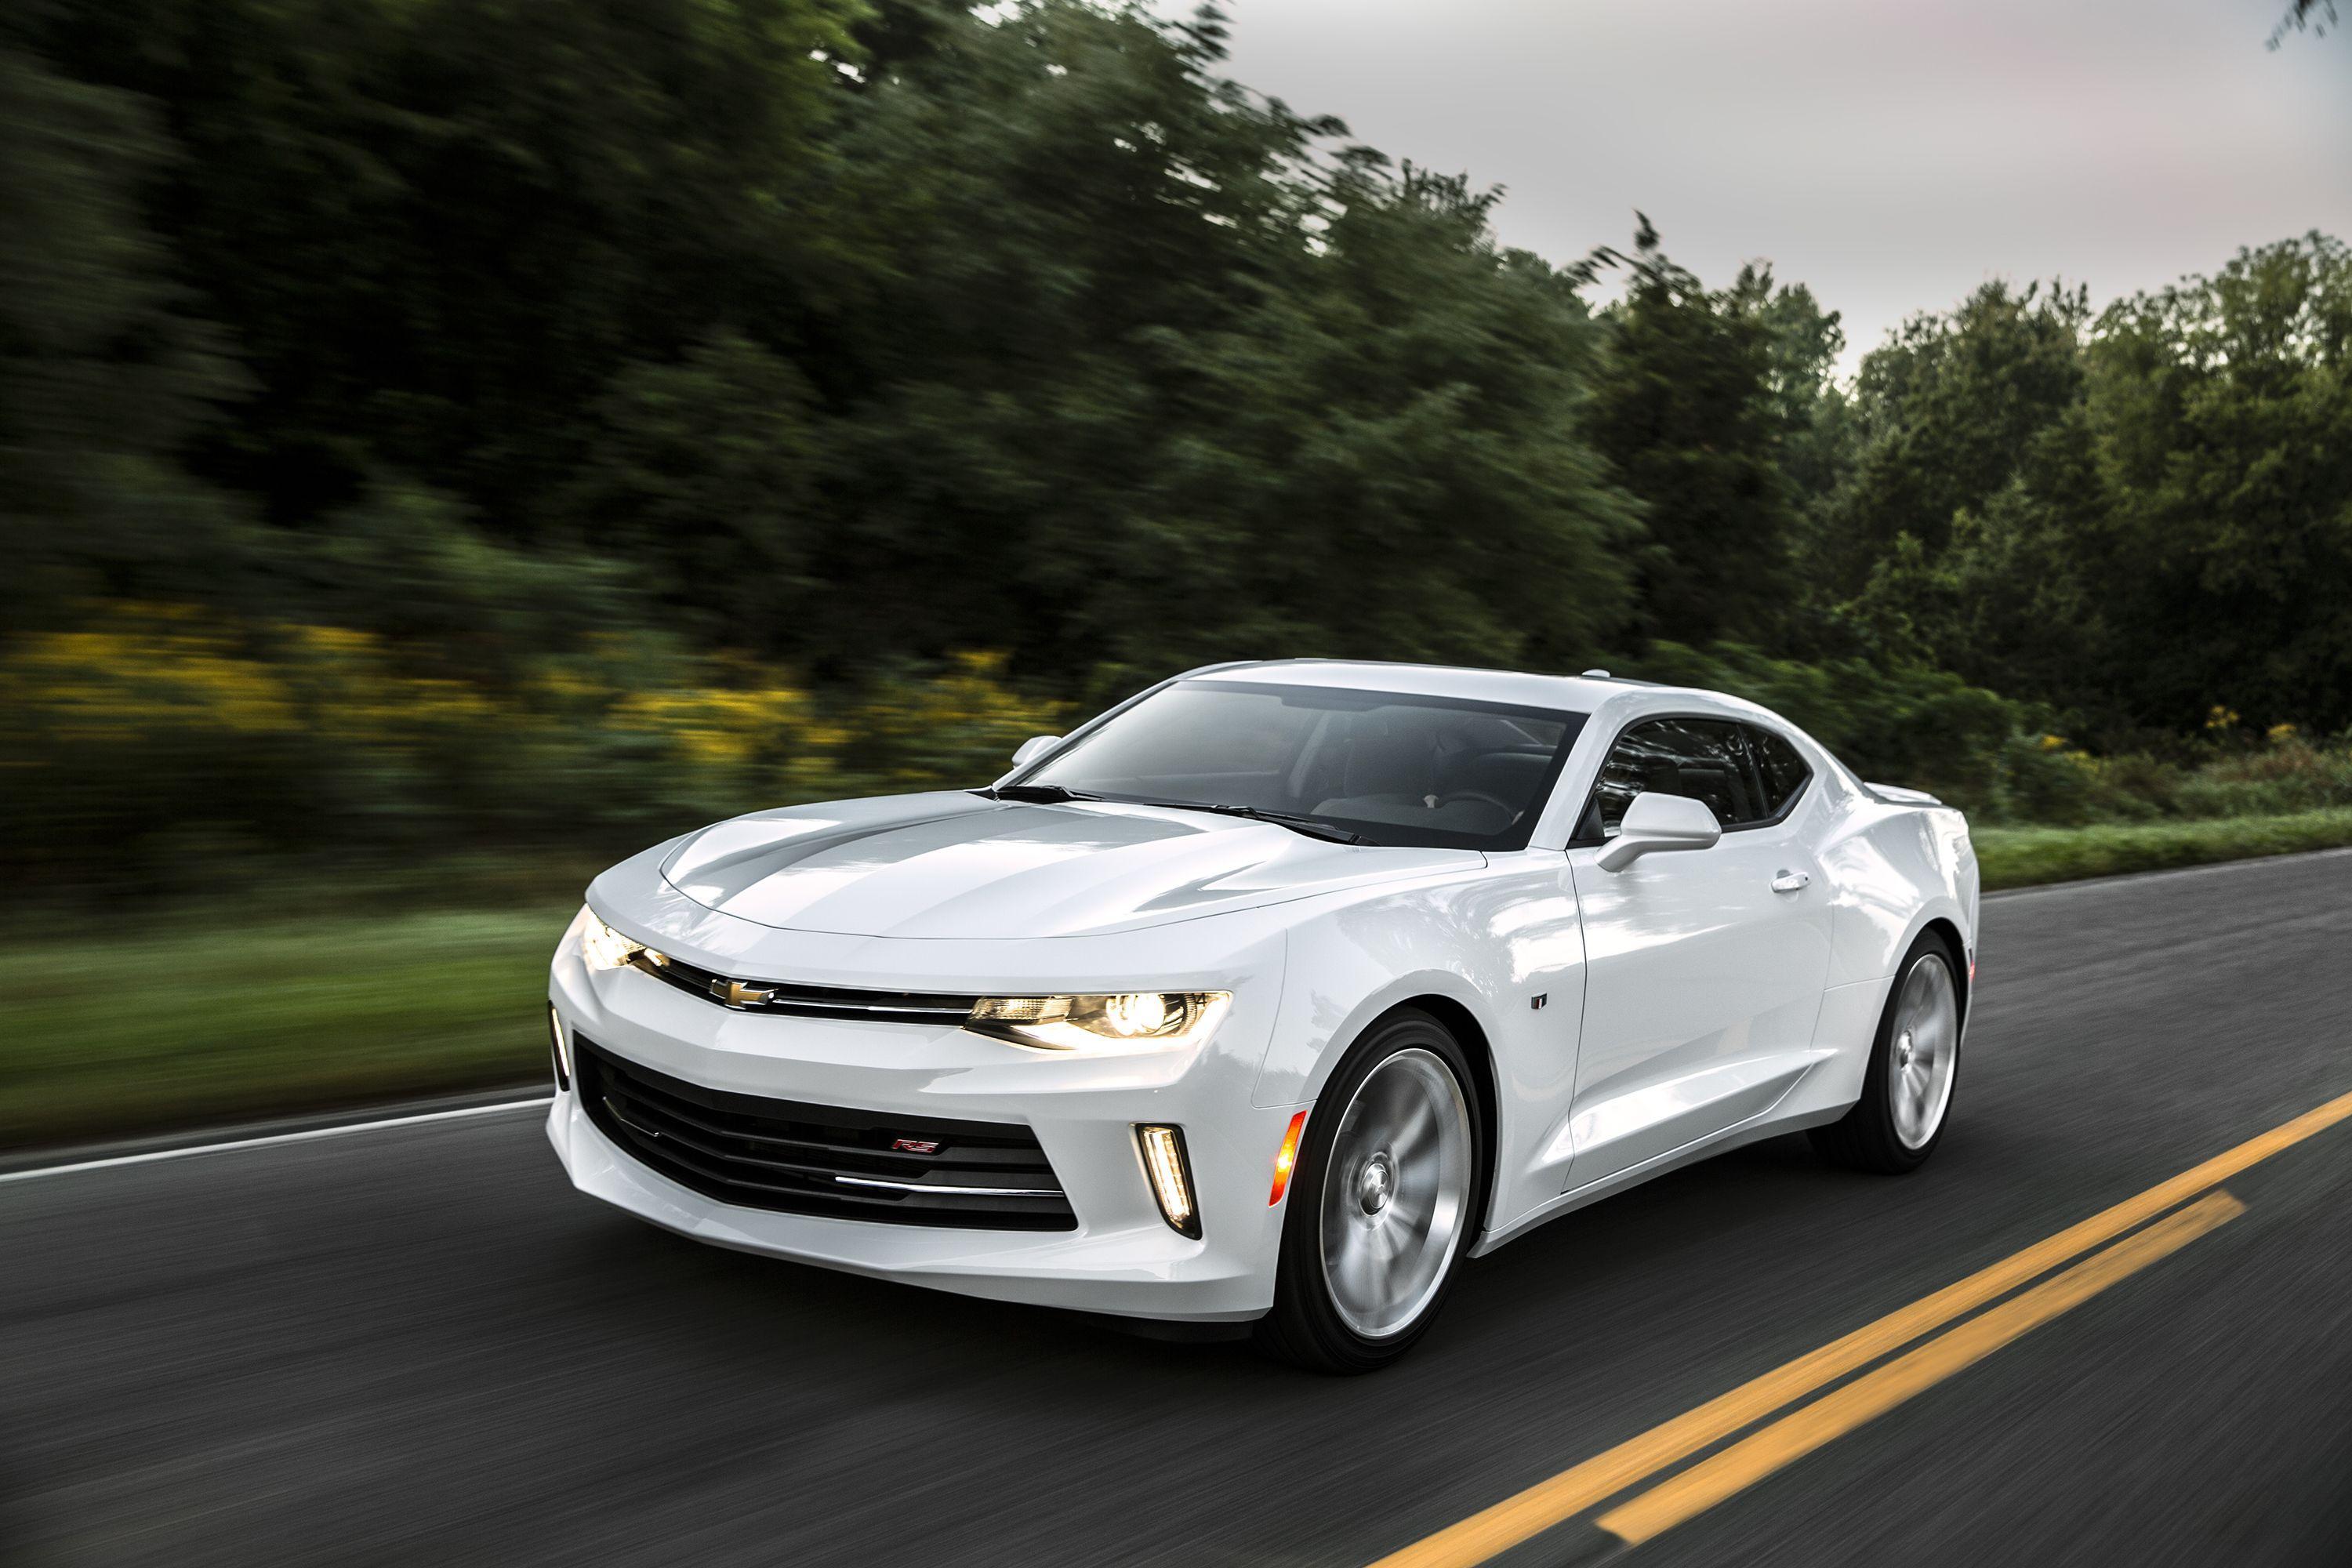 Chevy Introduces Camaro Accessories, Performance Parts